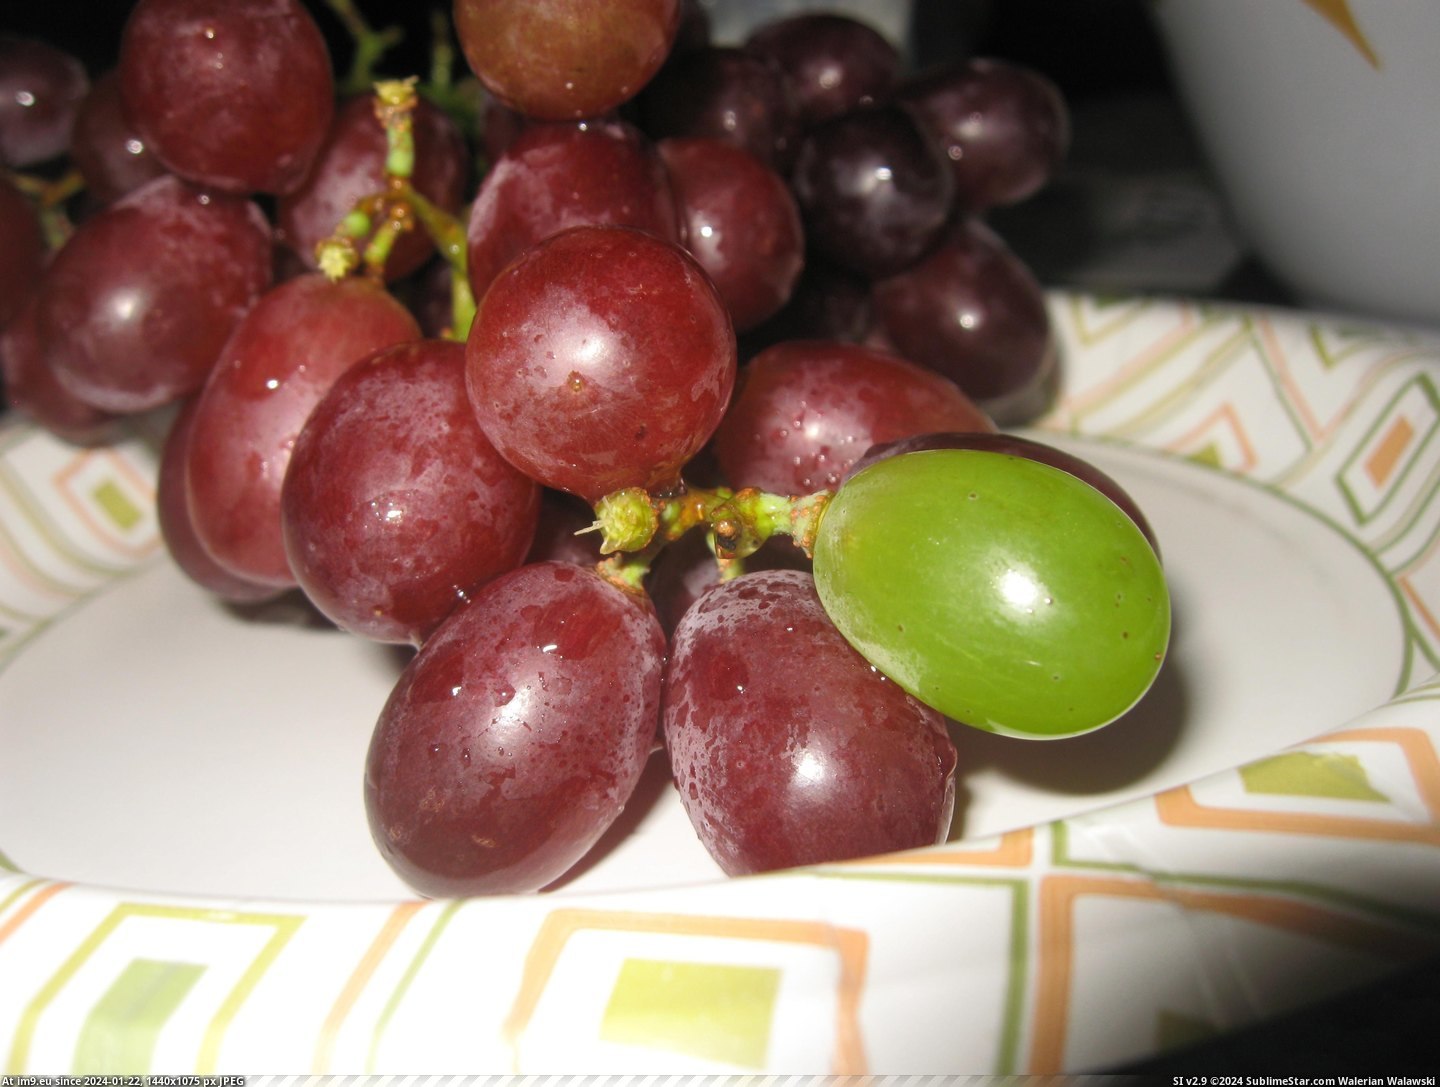 #One #Green #Grapes #Grape #Cluster #Purple #Growing [Mildlyinteresting] I found one green grape growing on a cluster of purple grapes Pic. (Image of album My r/MILDLYINTERESTING favs))